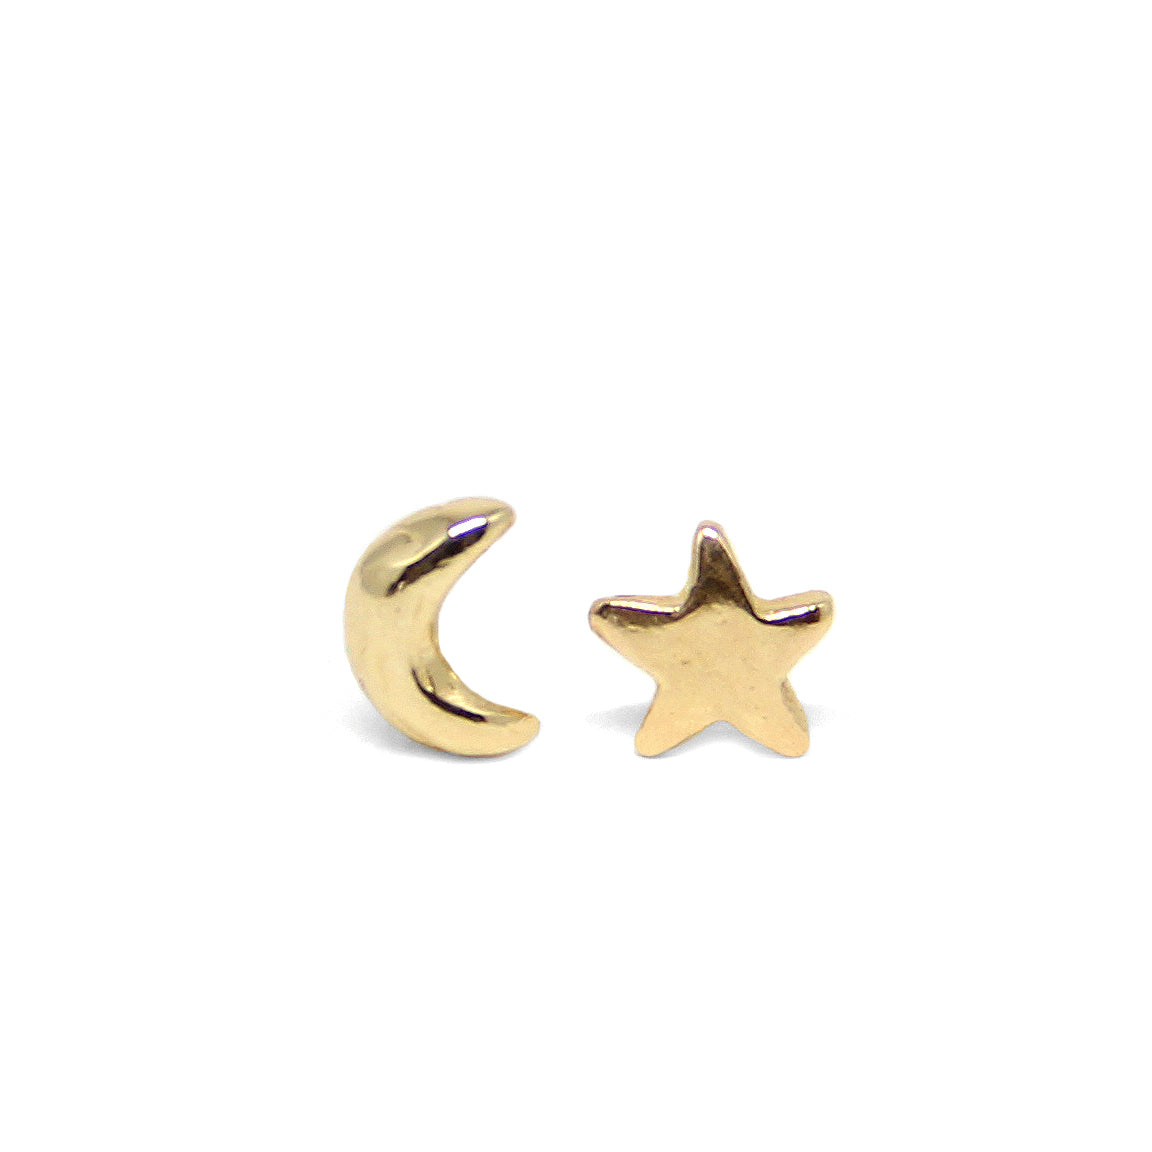 Gold Moon and Star stud earrings - Blooming Lotus Jewelry